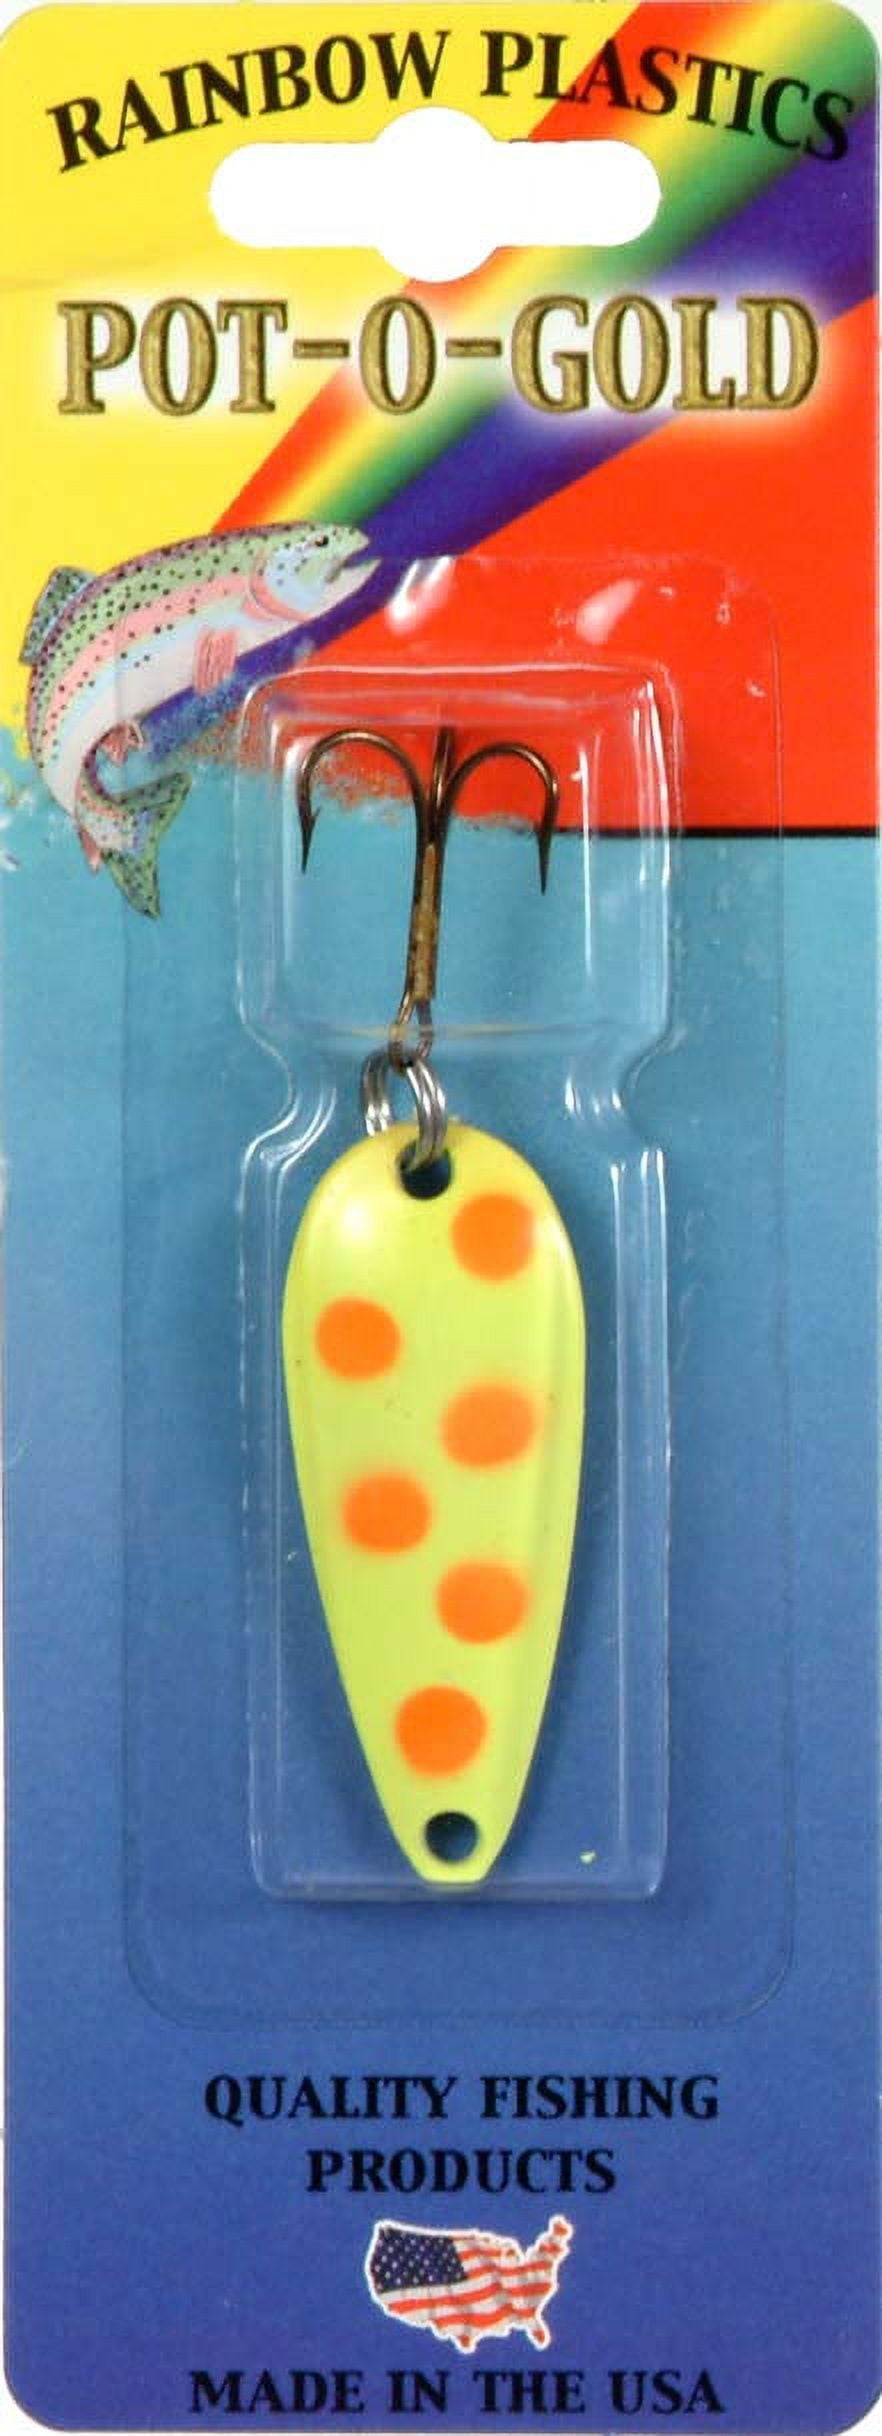 Double X Tackle Pot-o-gold Bass & Trout Spoon Fishing Lure, Frog